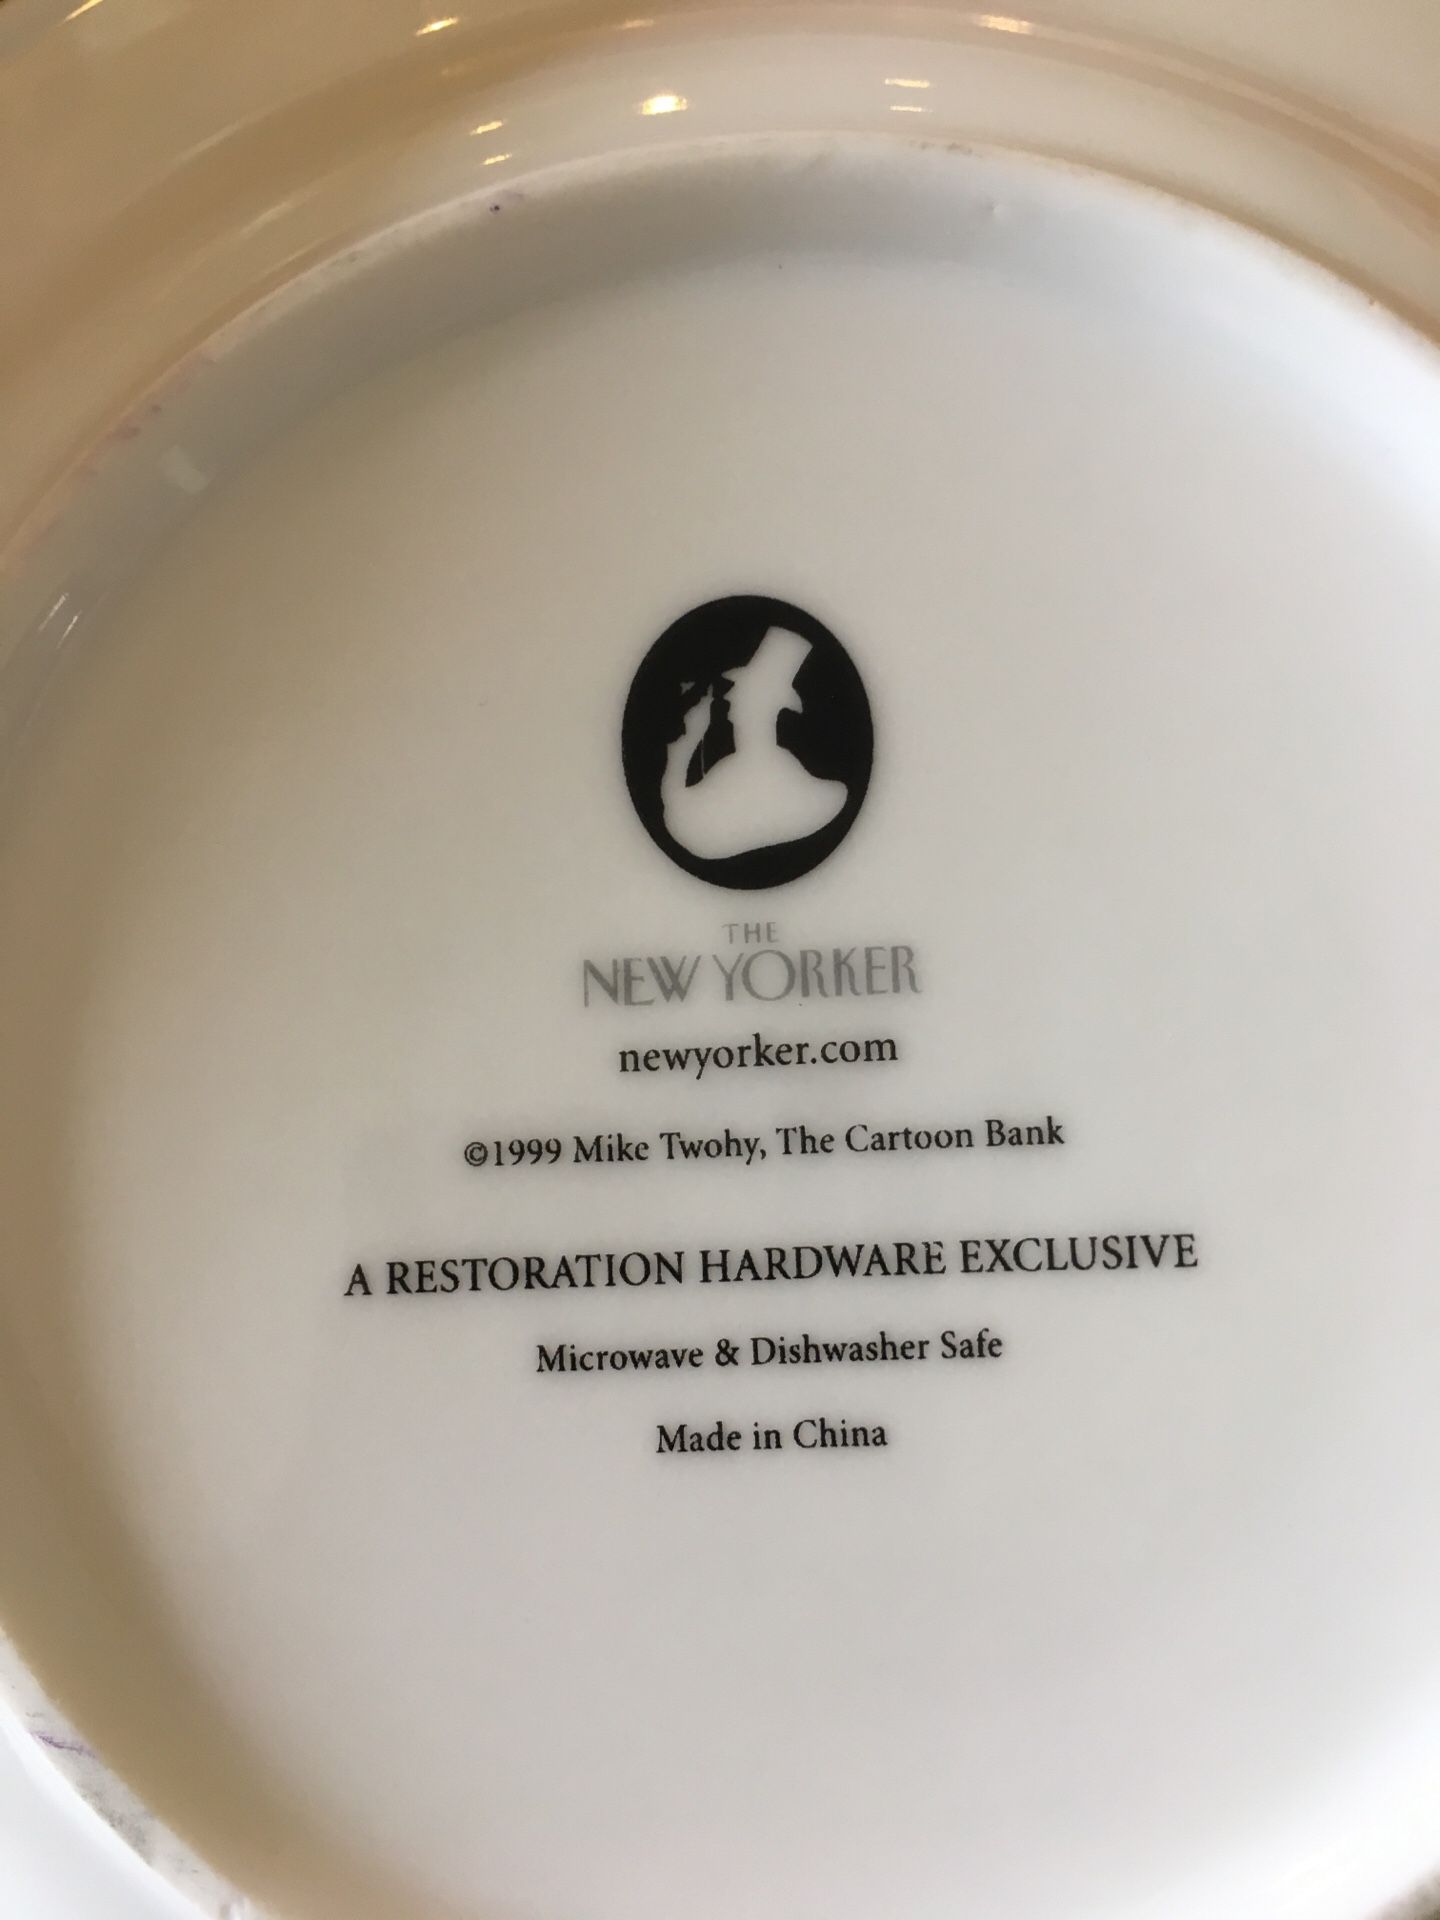 5 New Yorker plates